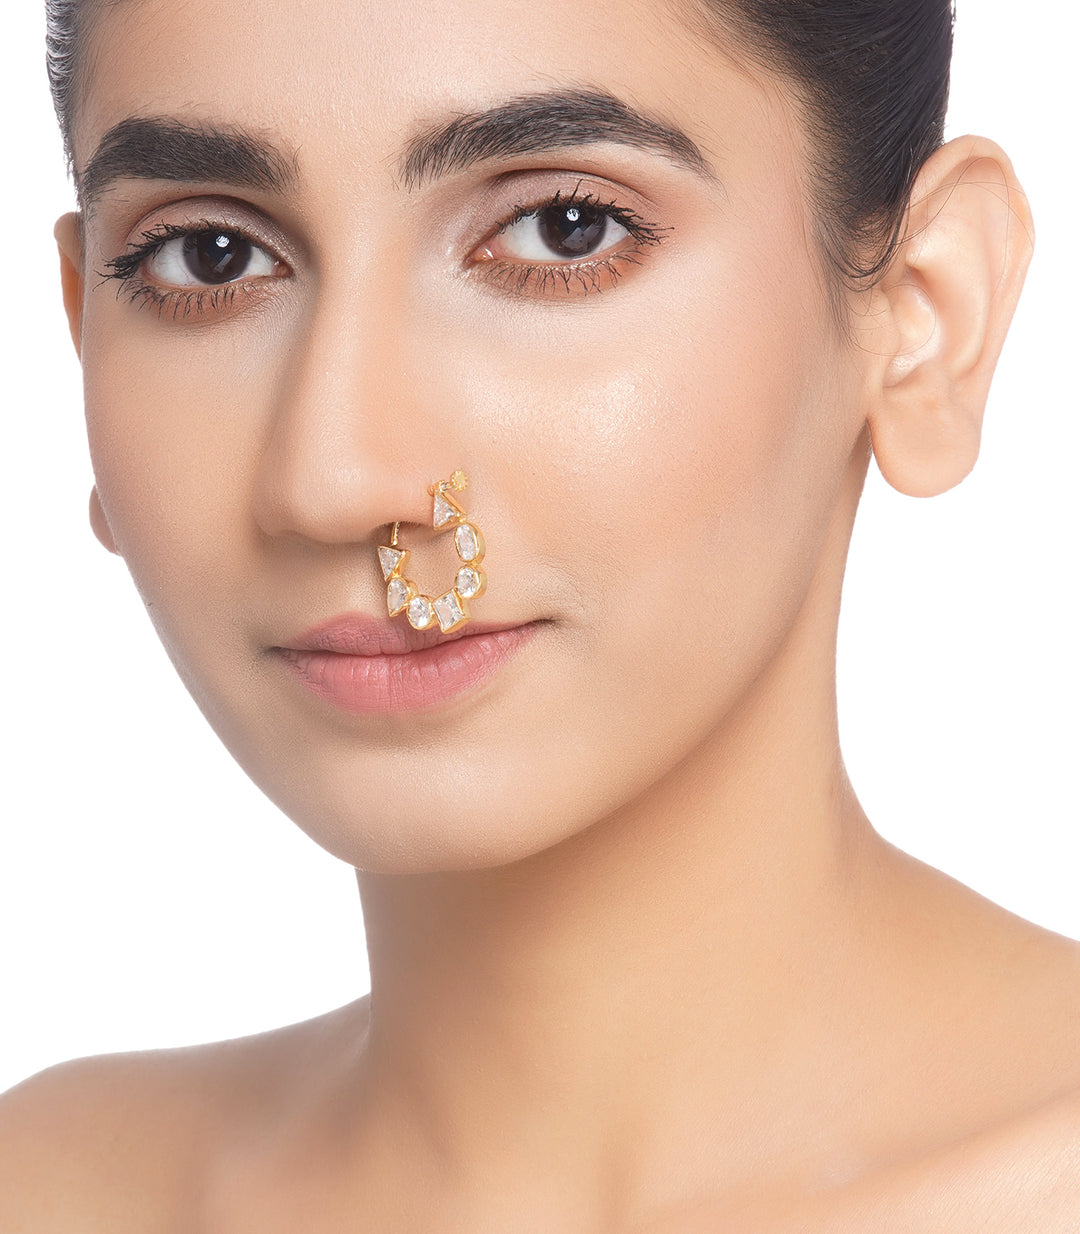 GOLD FINISH SMALL SIZE CUBIC ZIRCONIA NOSE RING